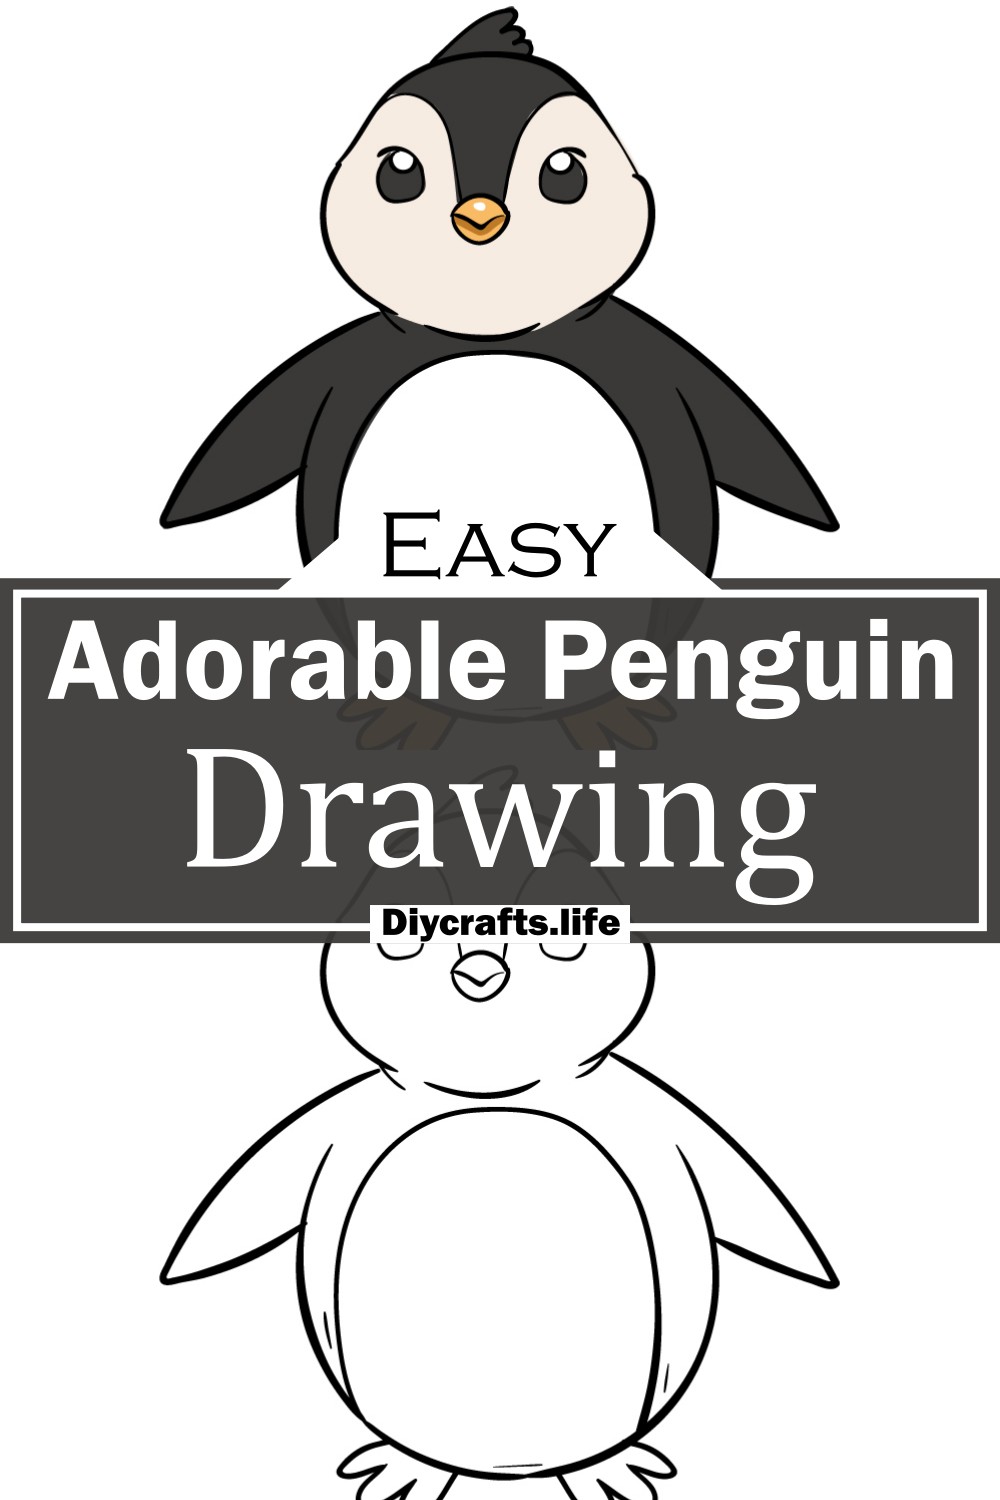 Adorable Penguin Drawing